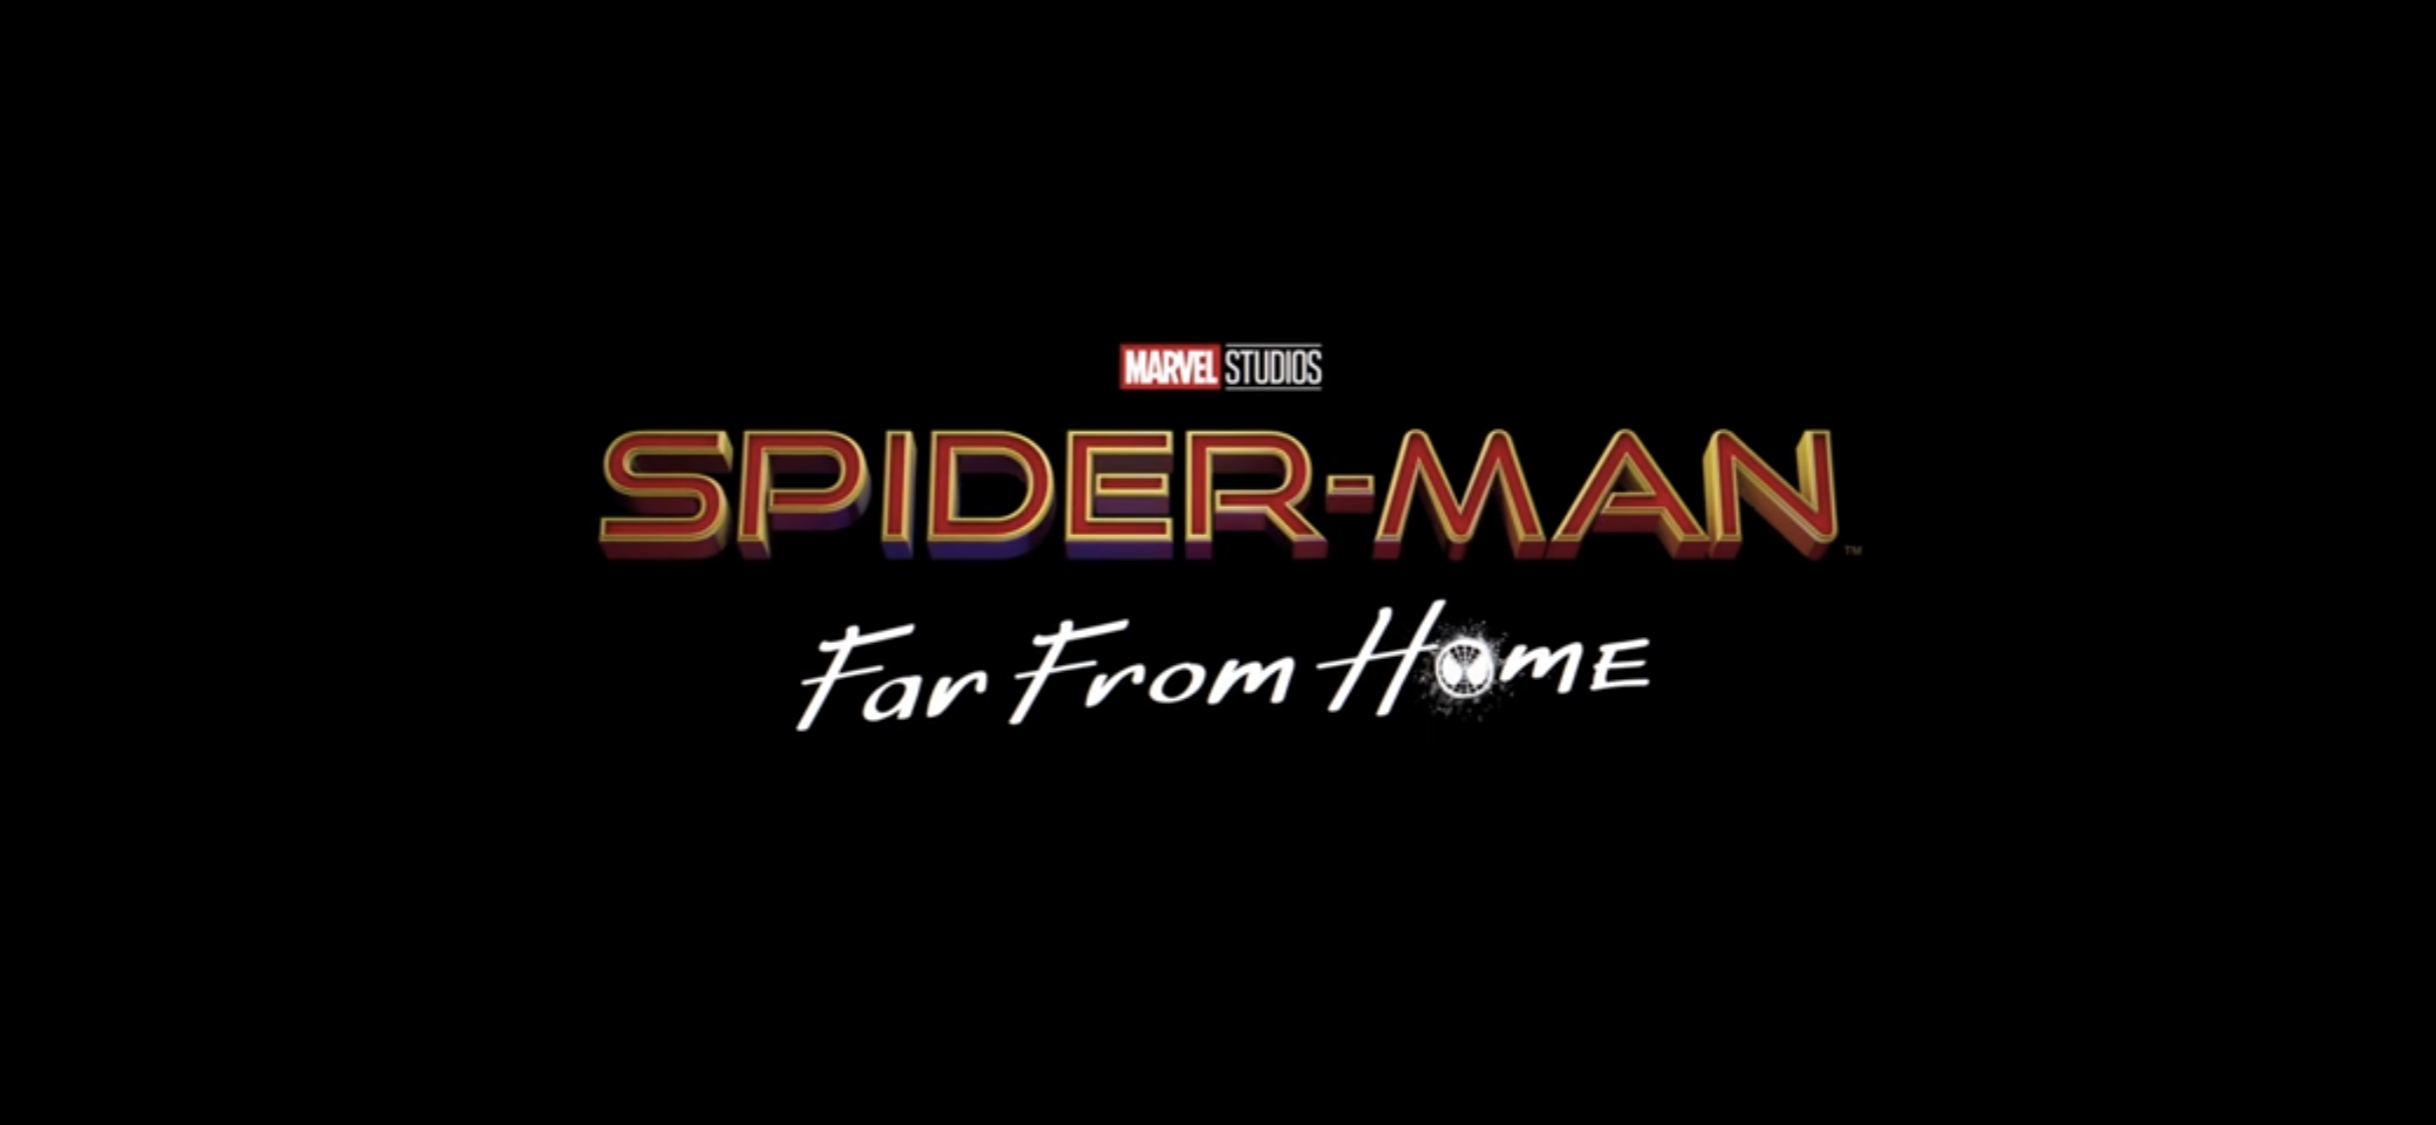 London Bridge is falling down in first trailer for Spider-man: Far From Home